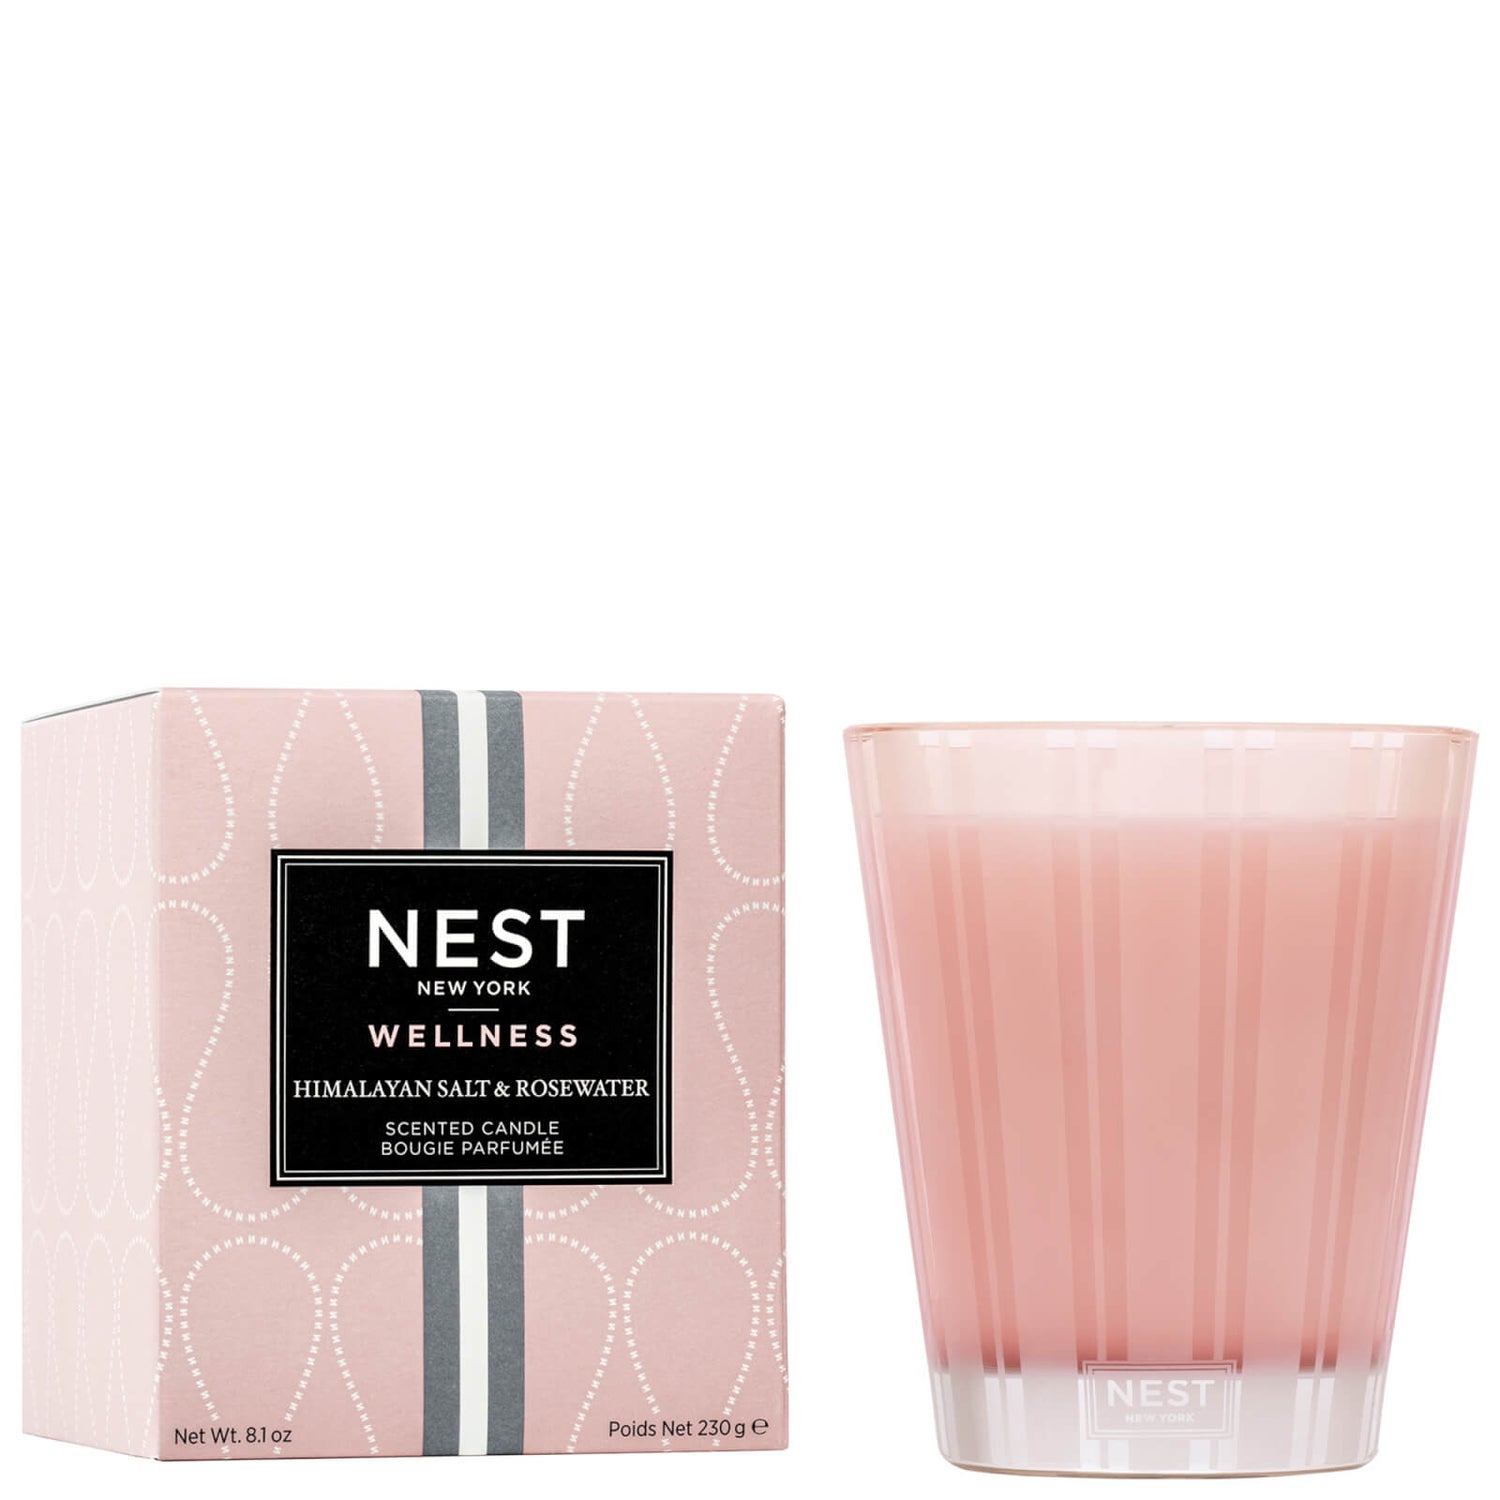 NEST New York Himalayan Salt and Rosewater Classic Candle 243ml